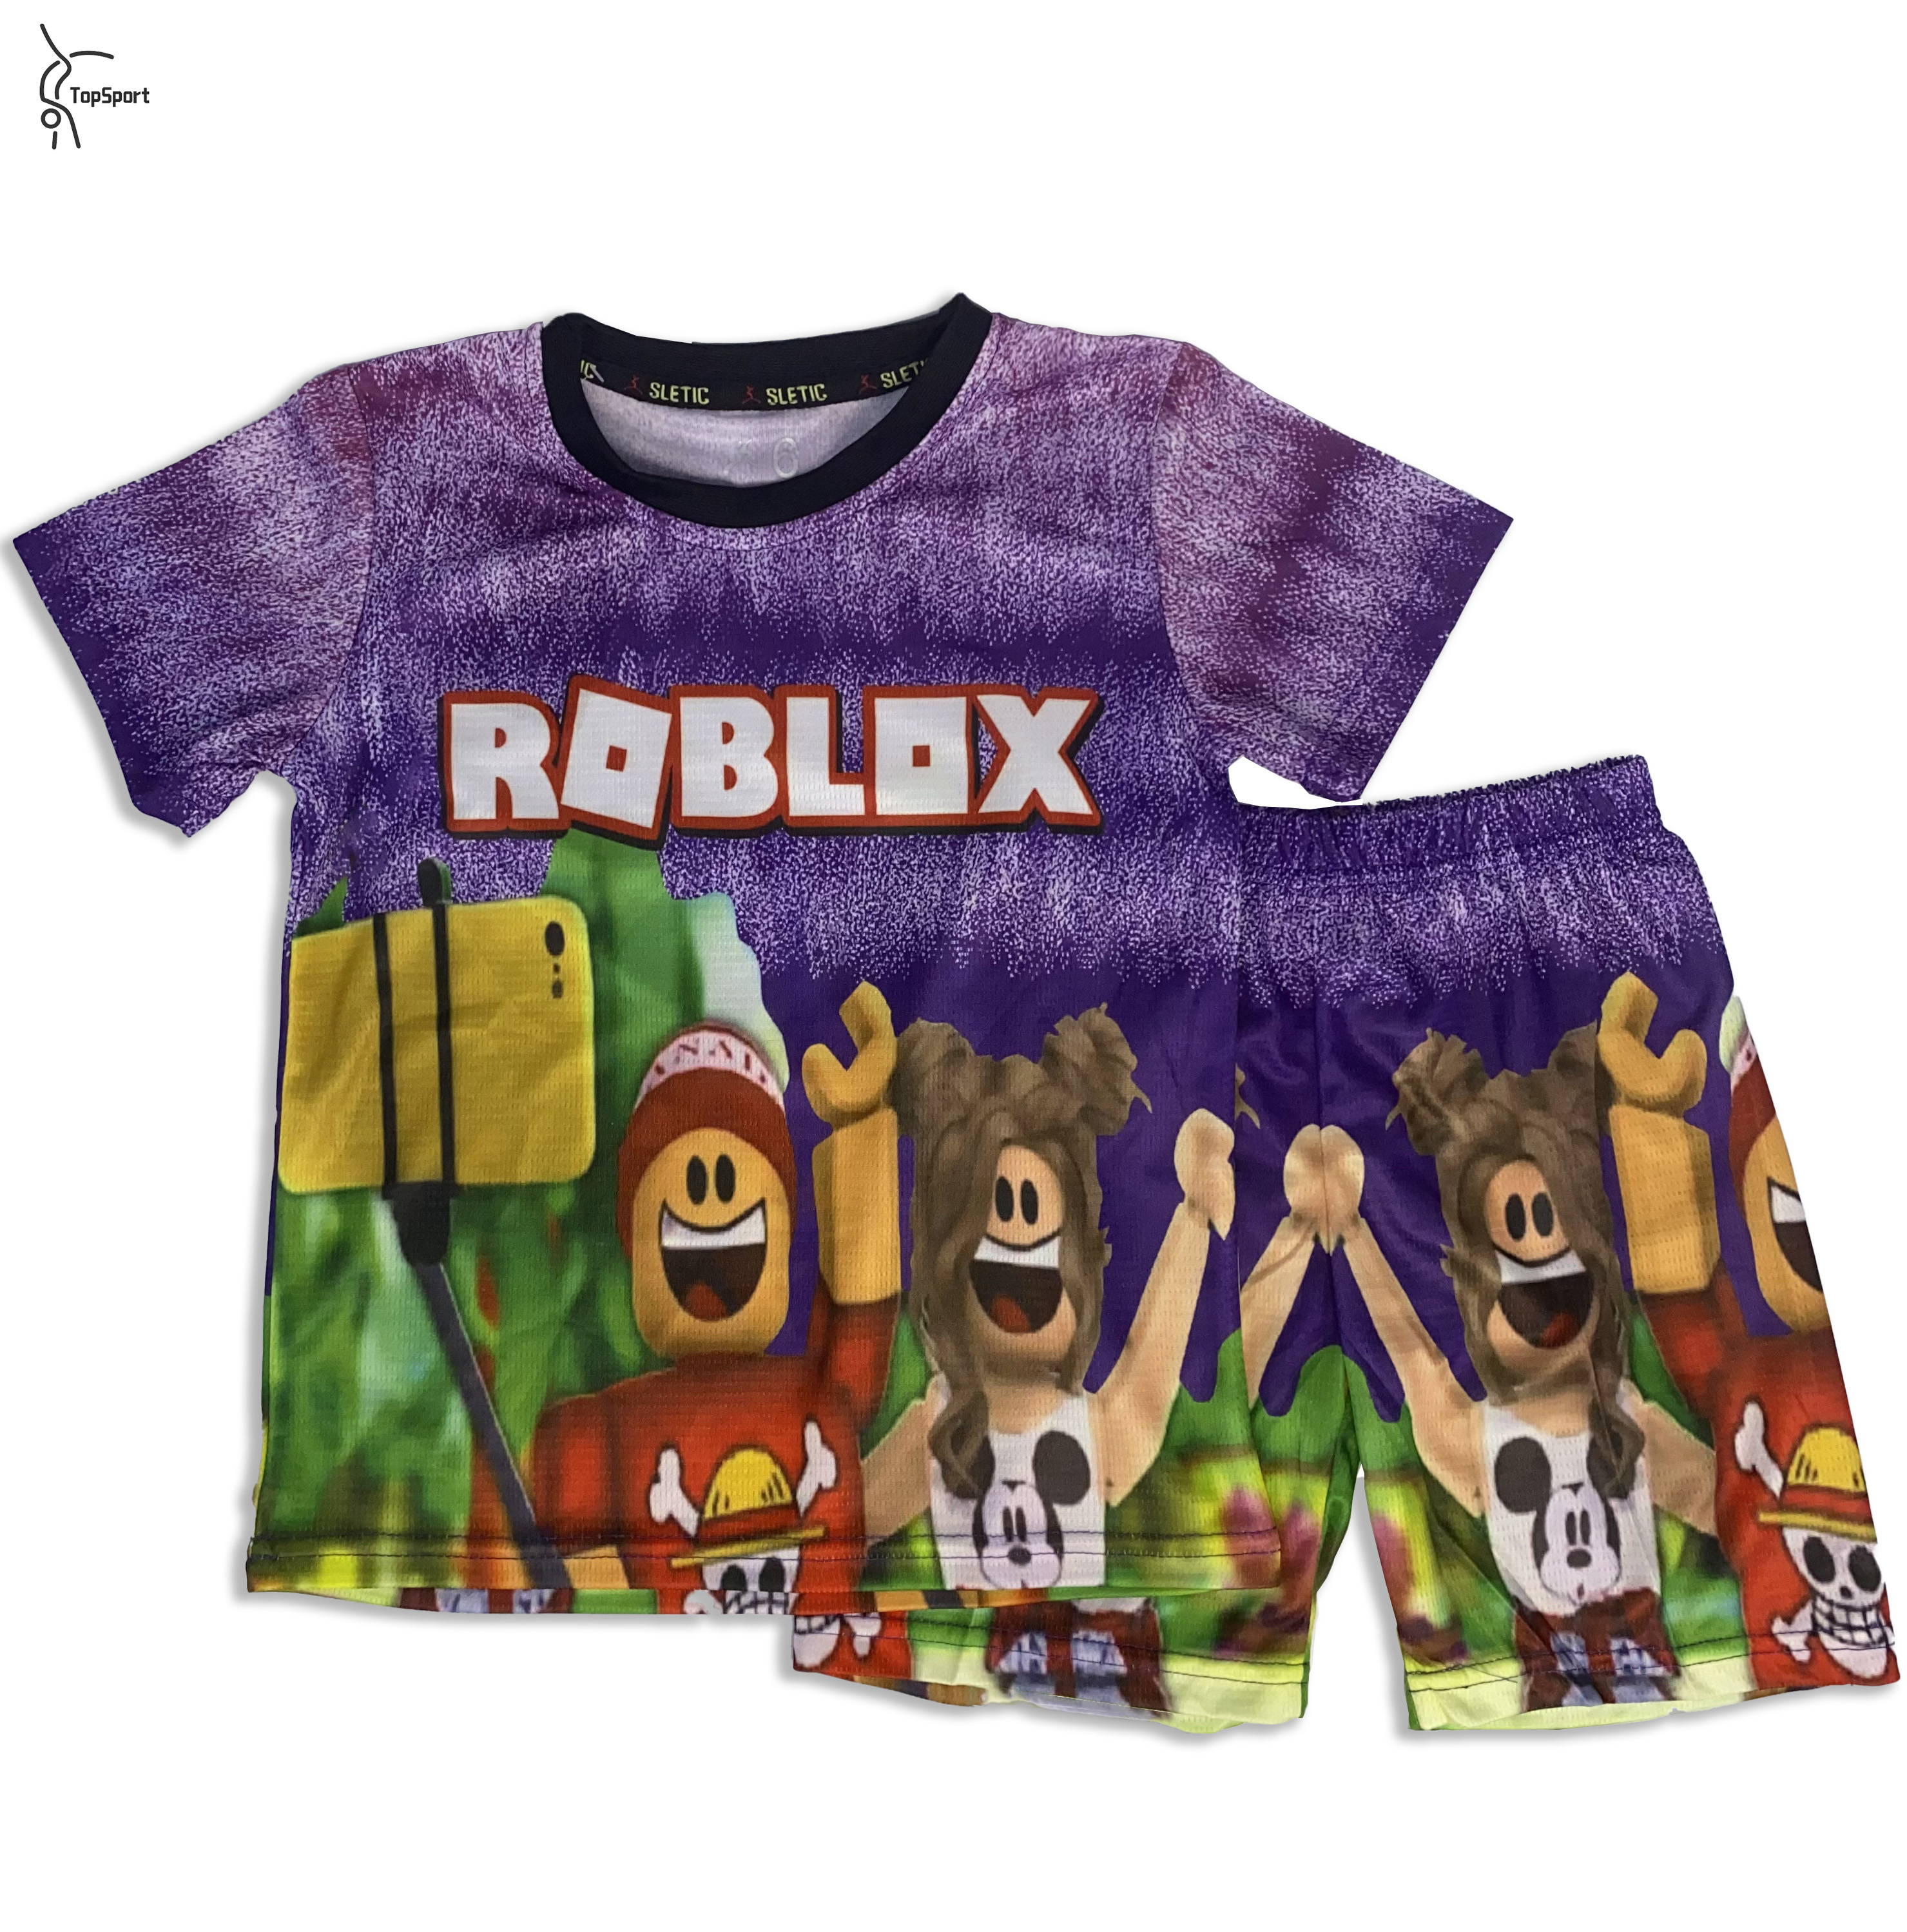 Black and White Cool Anime T-Shirt - Roblox